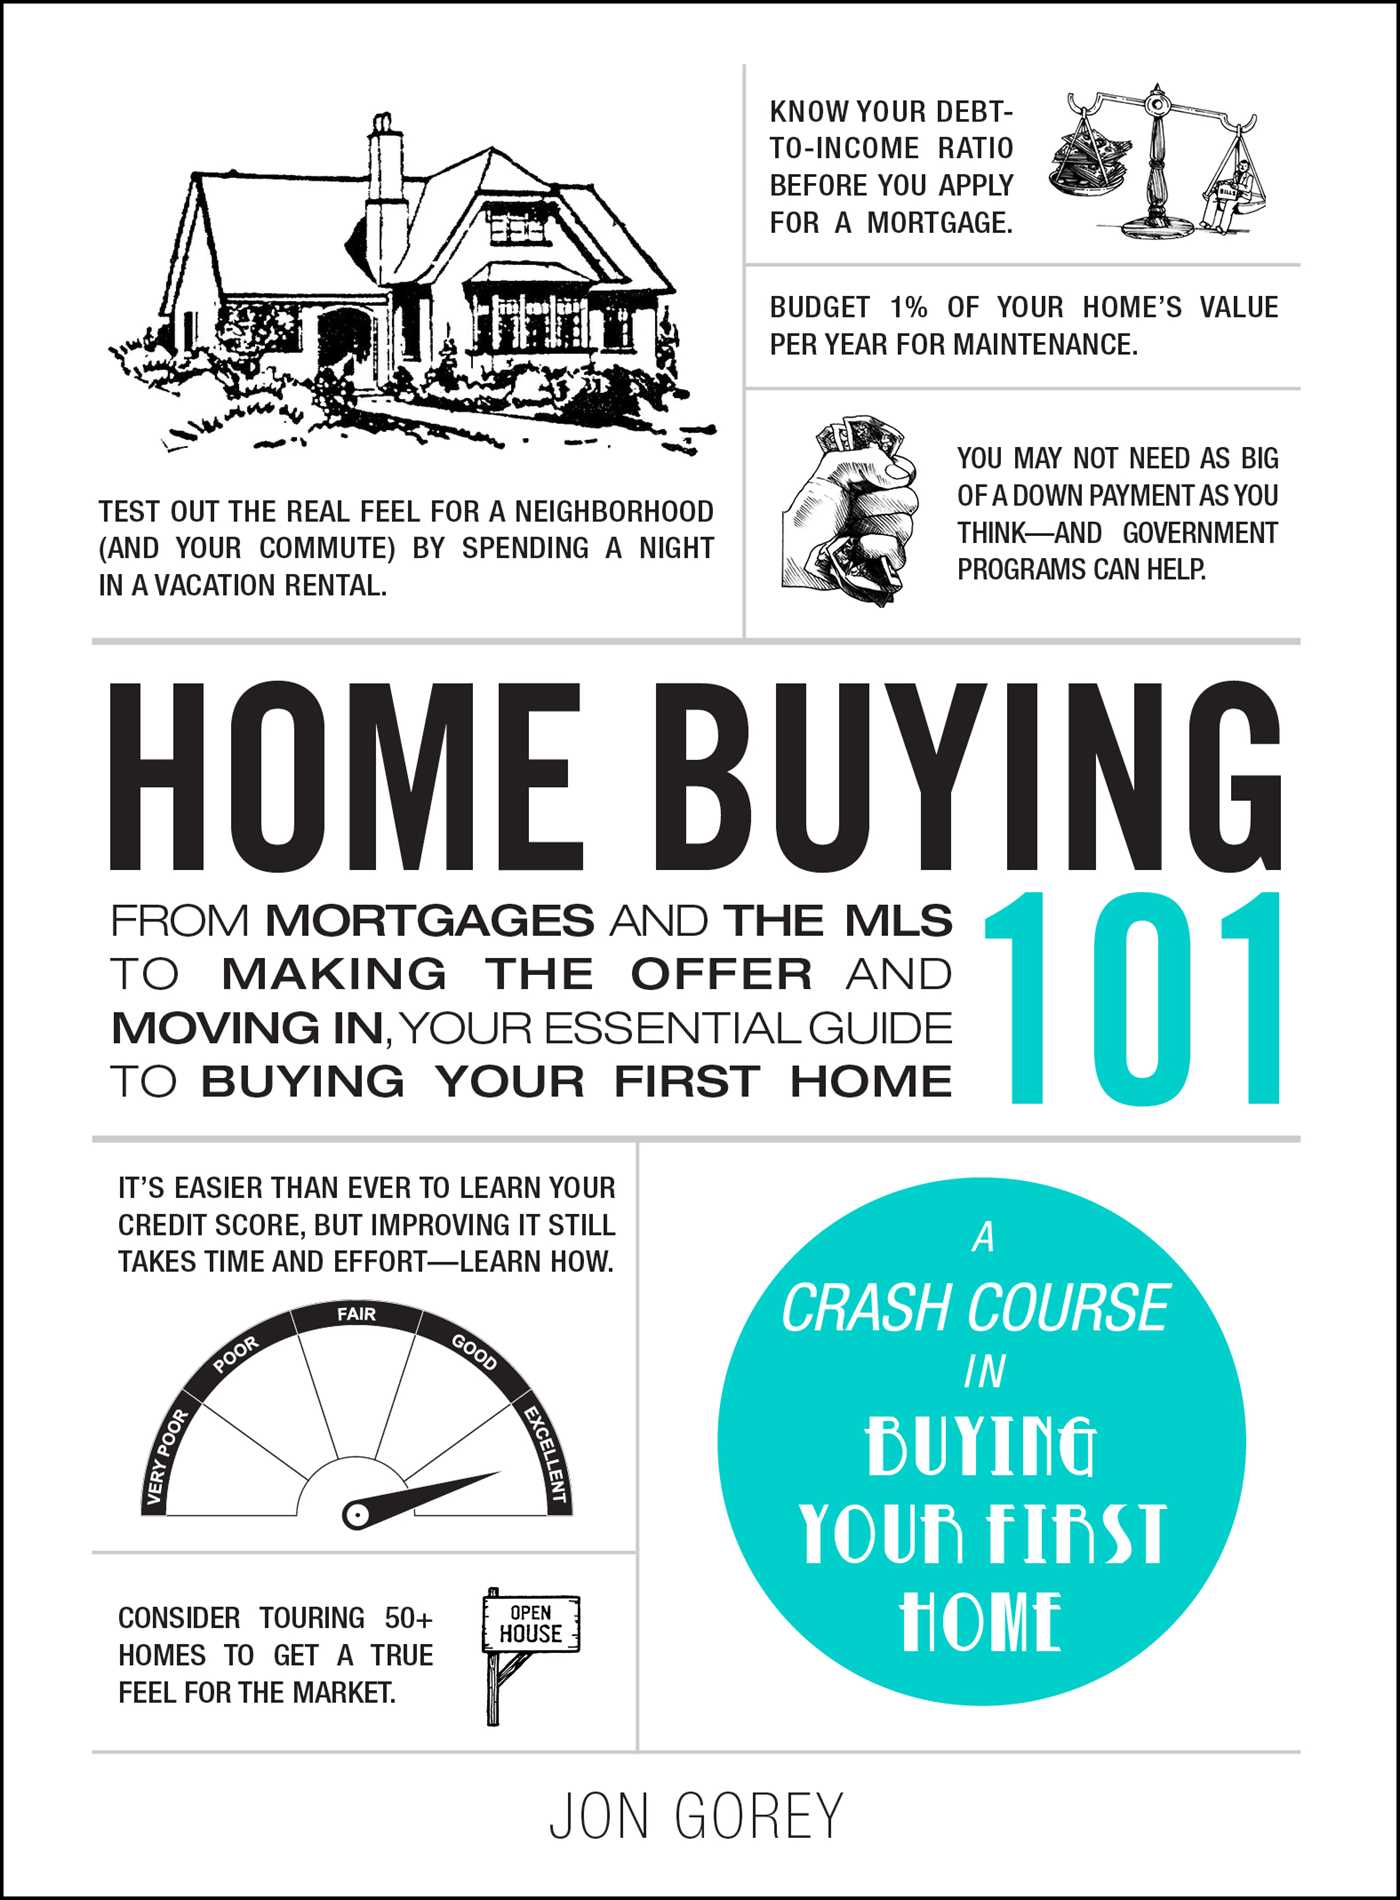 The cover of Jon Grorey's book,Home Buying 101. The cover features lots of black text on a white background. The title is in all caps in the middle.